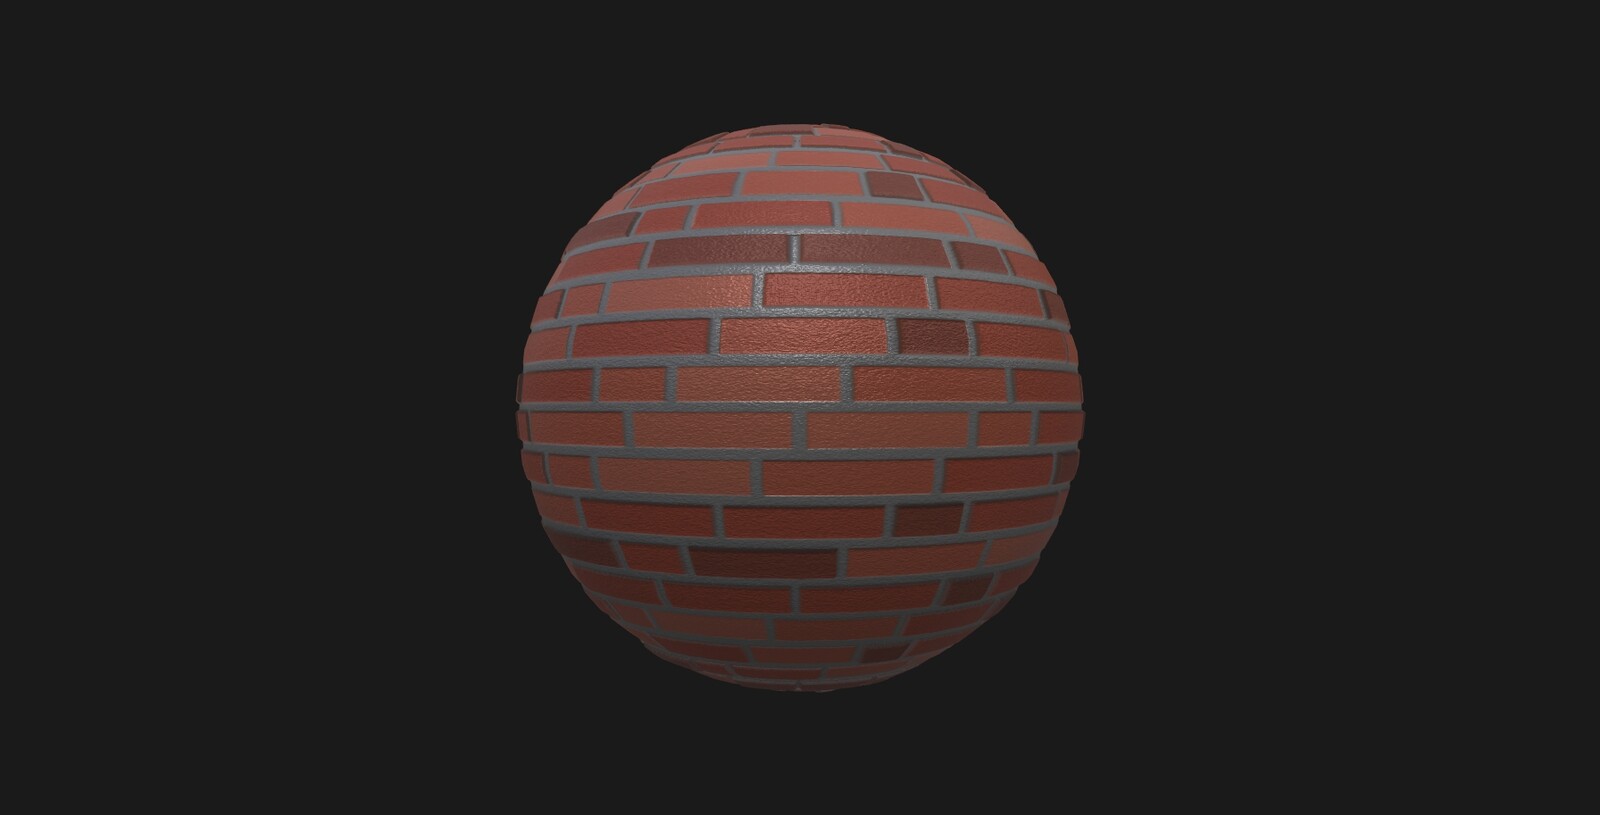 Other renders using shadermap